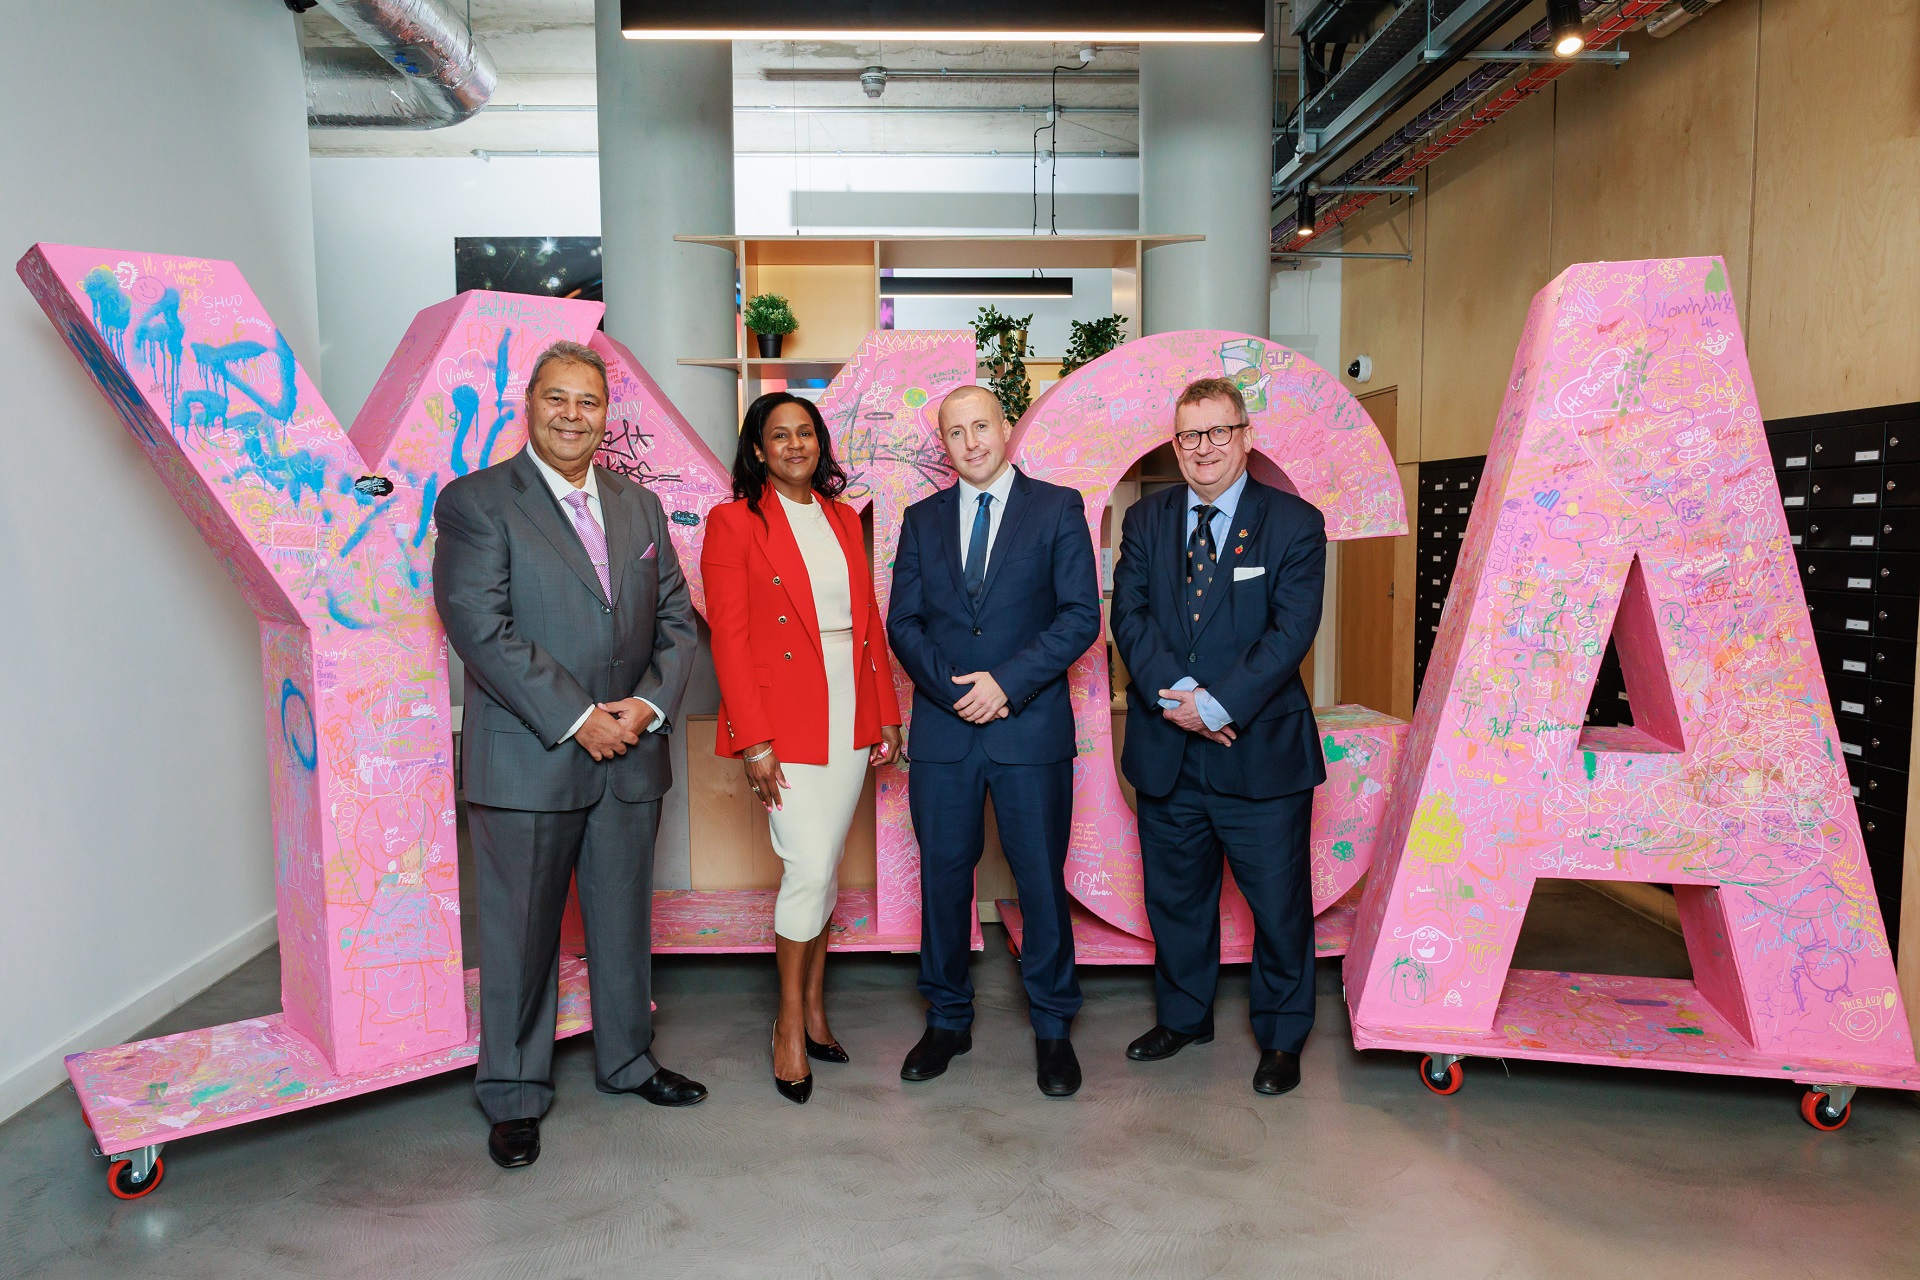 Emir Feisal, Director of Corporate Services at YMCA London City & North; Gillian Bowen, Chief Executive at YMCA London City and North; Paul Kelly, Relationship Manager at Unity Trust Bank and Paul Thornhill, Director of Thornhill Capital Ltd